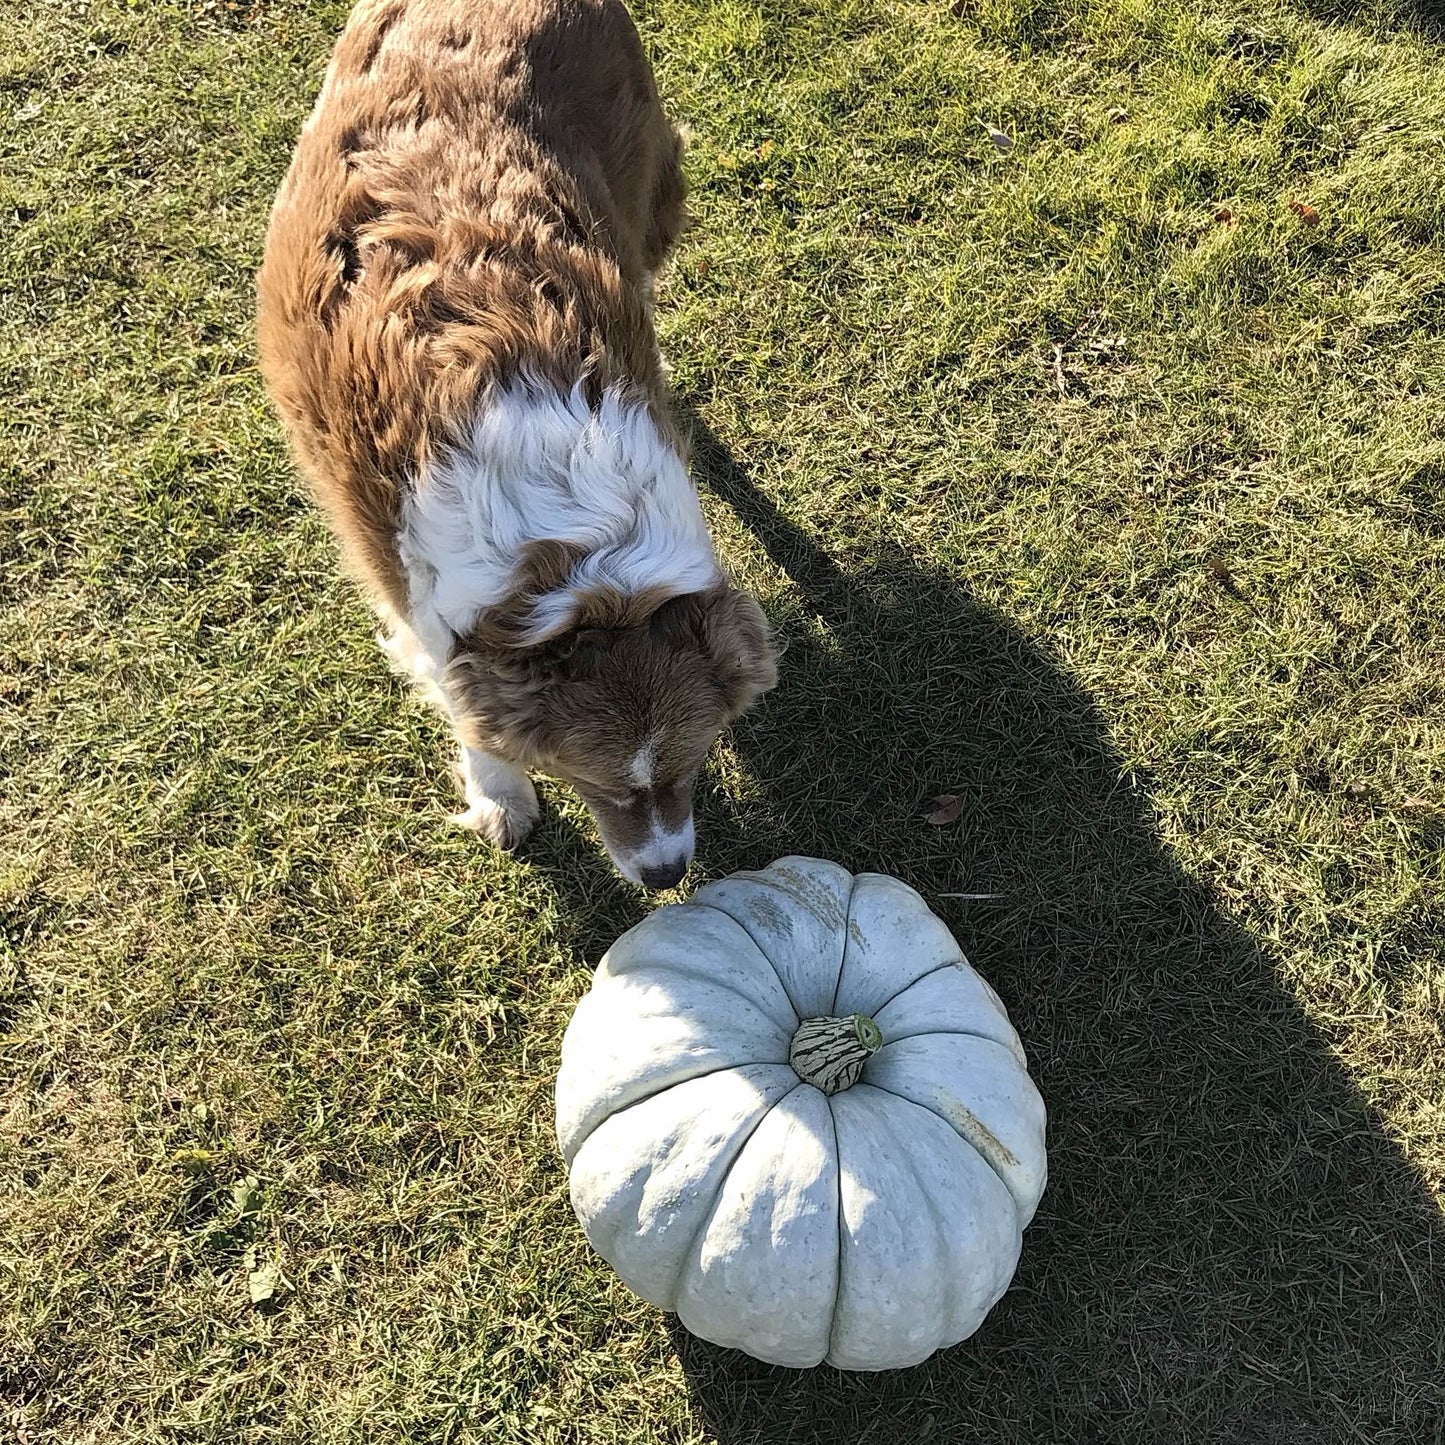 bobby the dog with a large white pumpkin